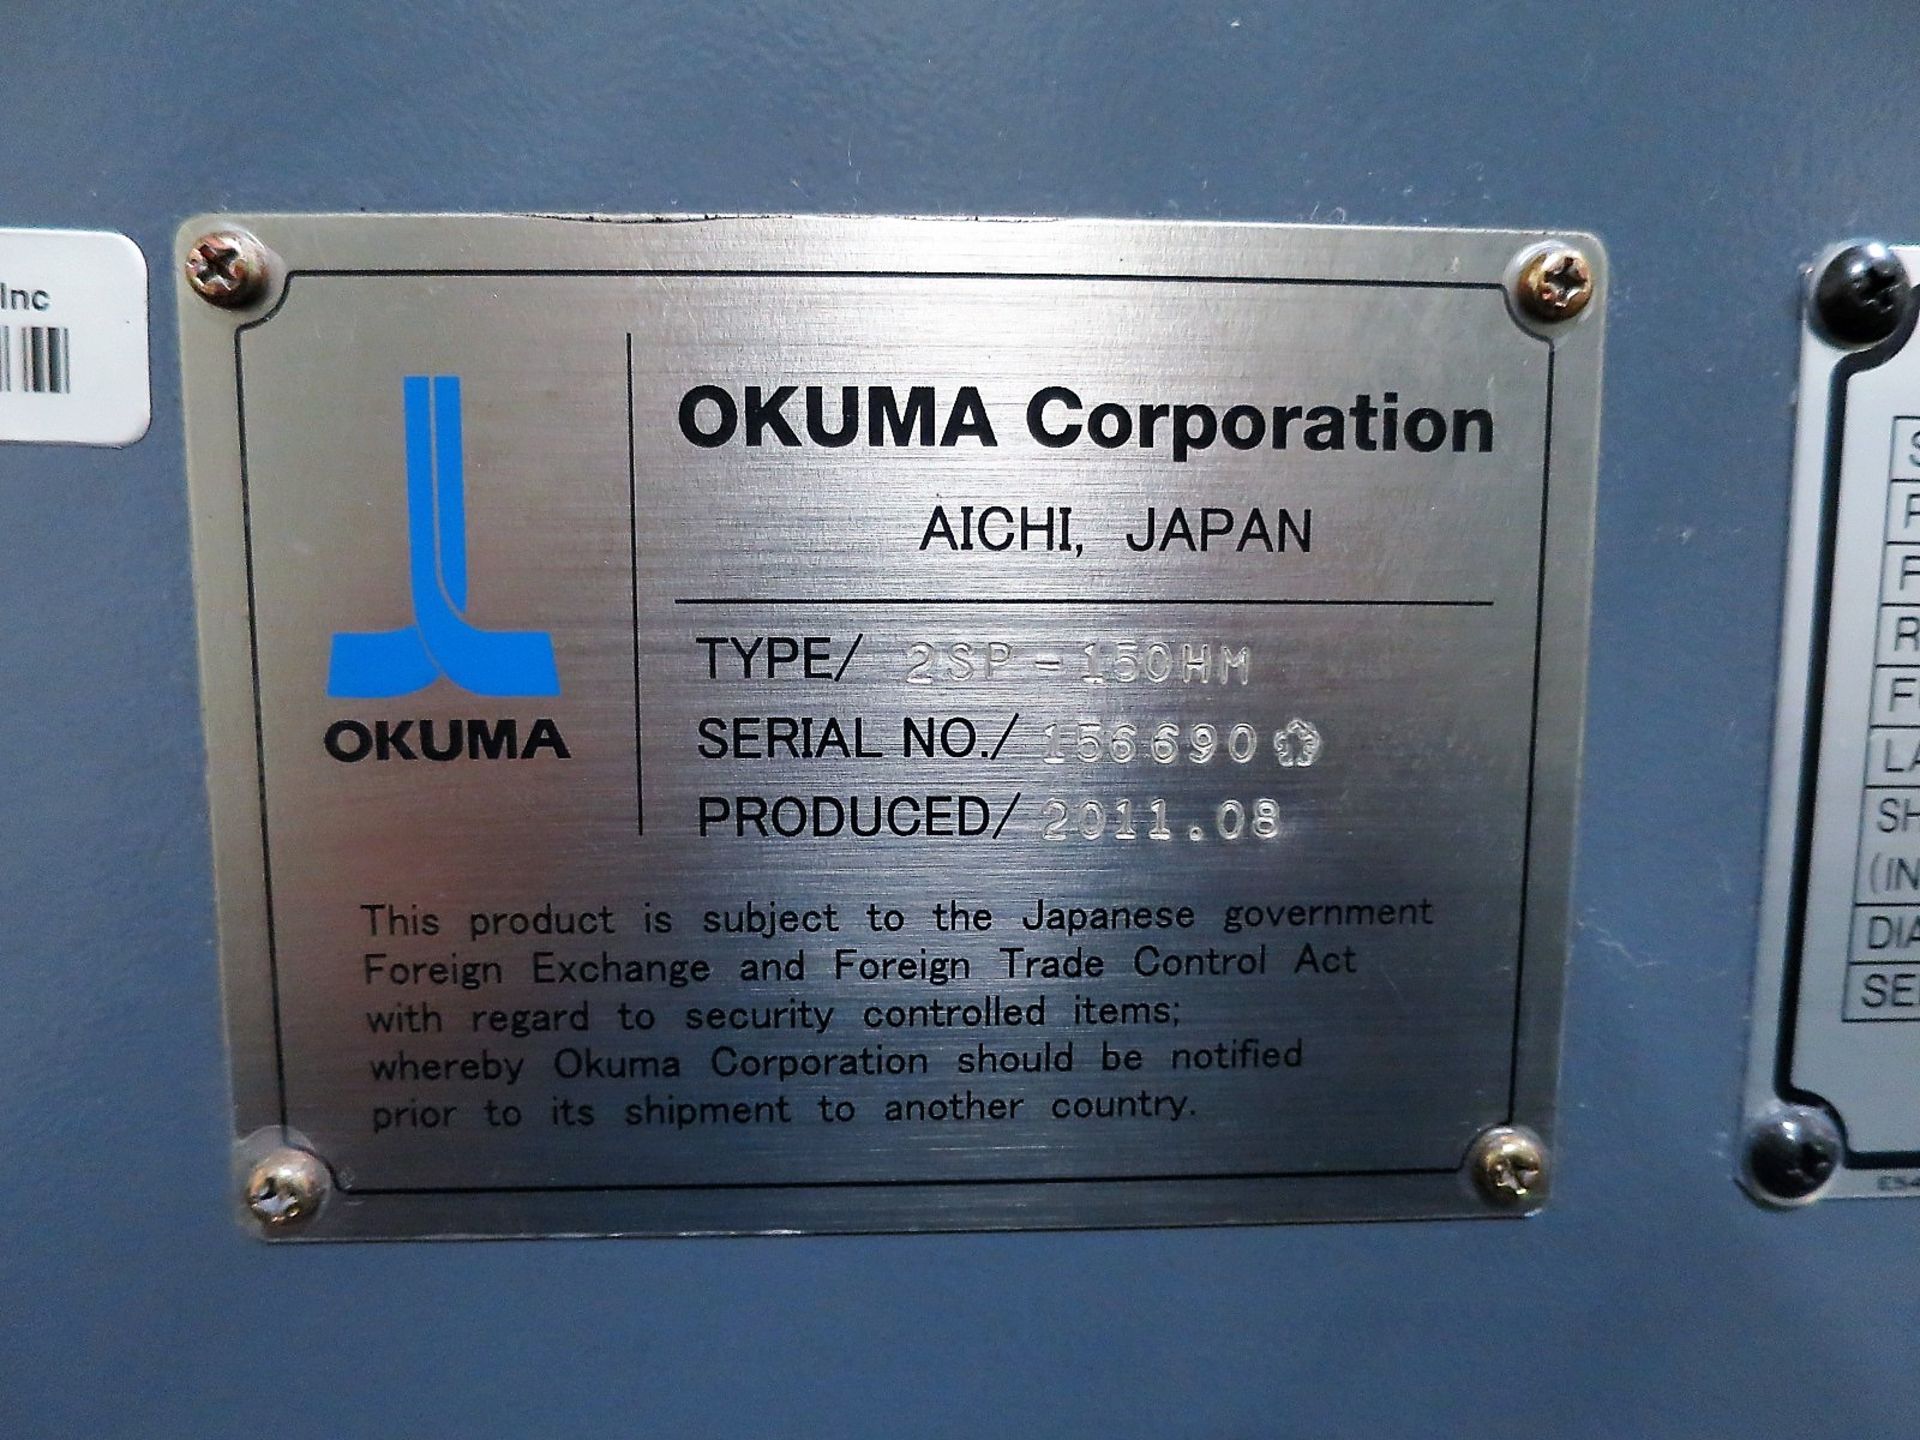 Okuma 2SP-150HM Twin Spindle 3-Axis Turning Center w/Live Milling, S/N 156690, New 2011 - Image 11 of 12